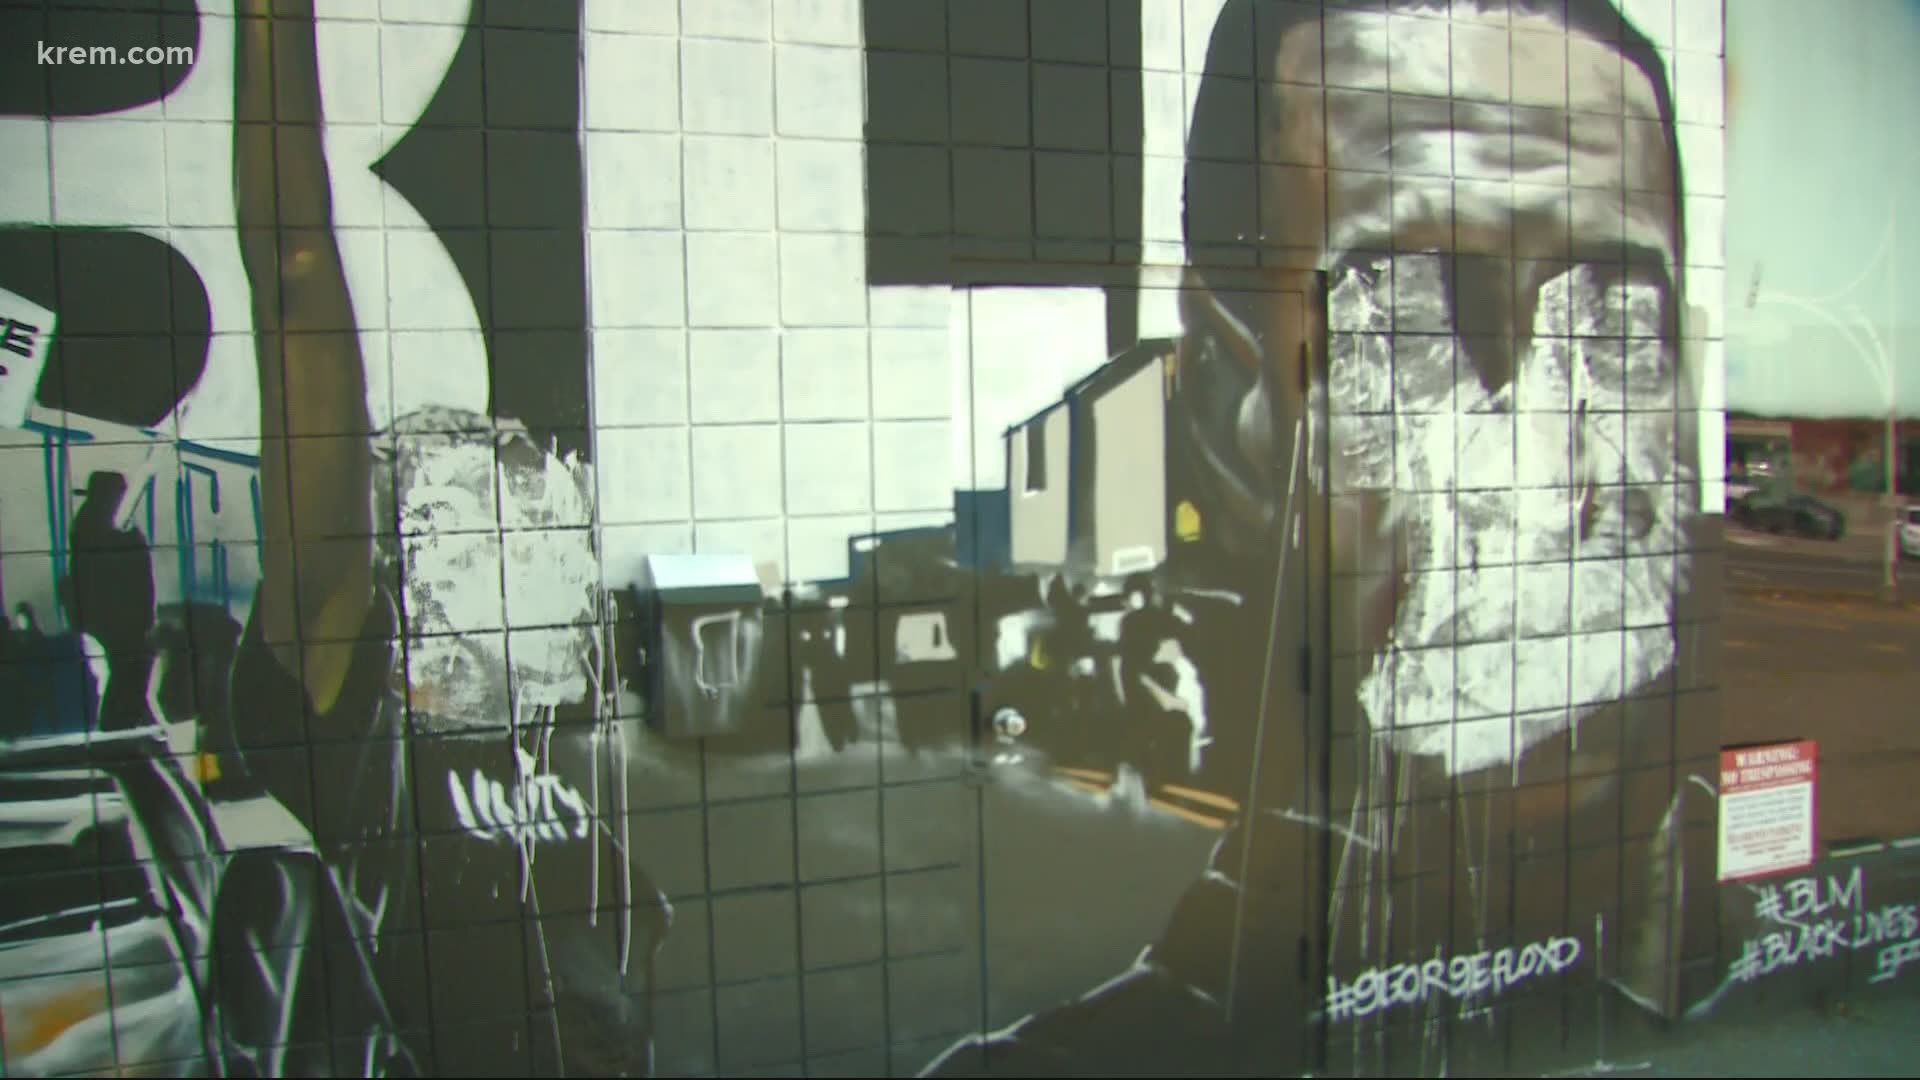 A mural painted in downtown Spokane as a show of solidarity for the Black Lives Matter movement has been defaced with white paint.